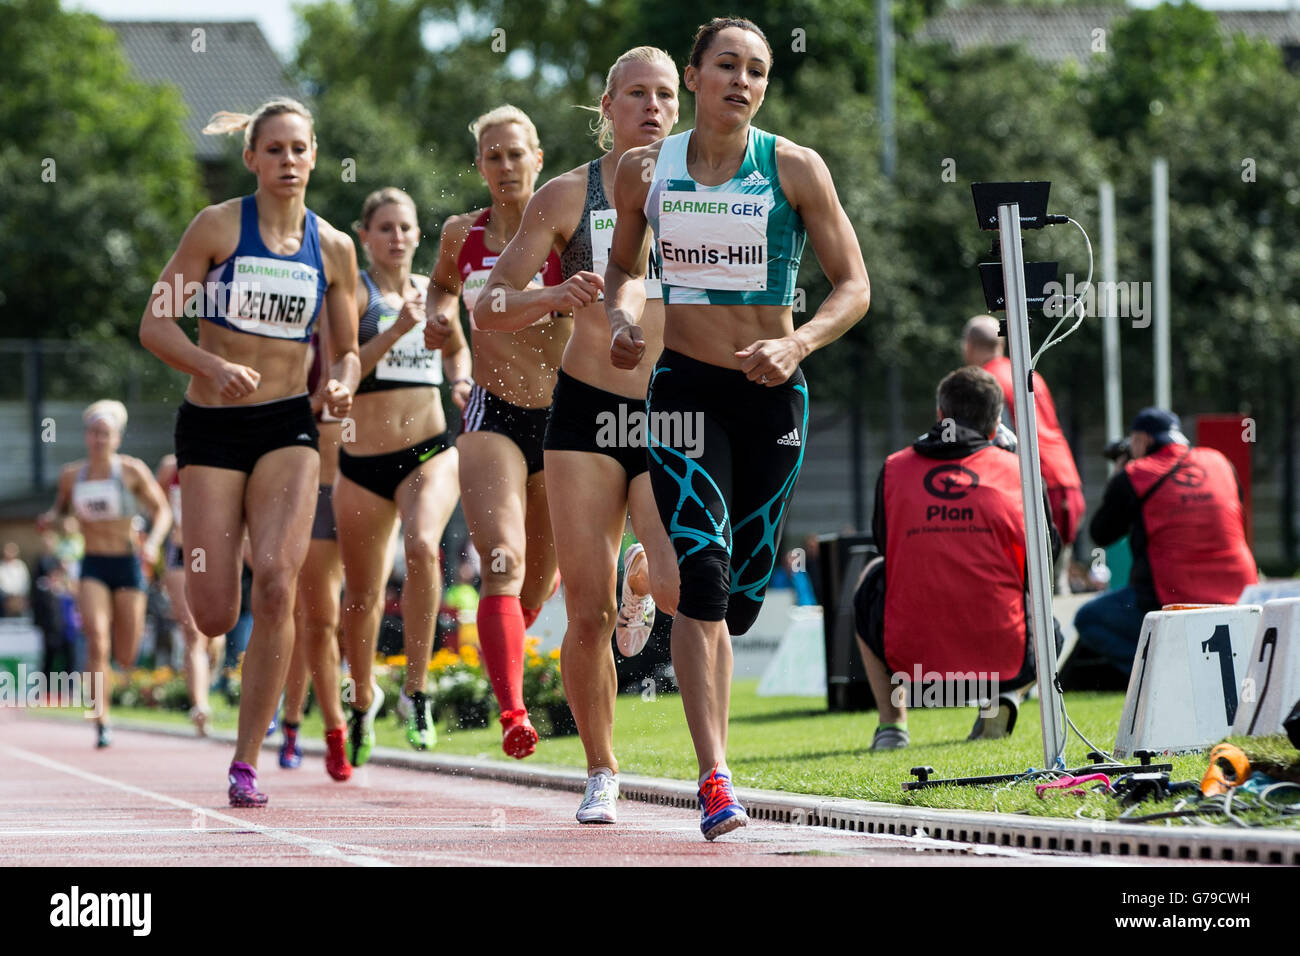 Ratingen, Germany. 26th June, 2016. British heptathlete Jessica Ennis-Hill (R-L), Verena Preiner of Austria, Jennifer Oeser, Carolin Schaefer of Germany and Michelle Zeltner of Switzerland in action during the 800-metre race at the Combined Events Challenge meeting in Ratingen, Germany, 26 June 2016. Photo: MAJA HITIJ/dpa/Alamy Live News Stock Photo